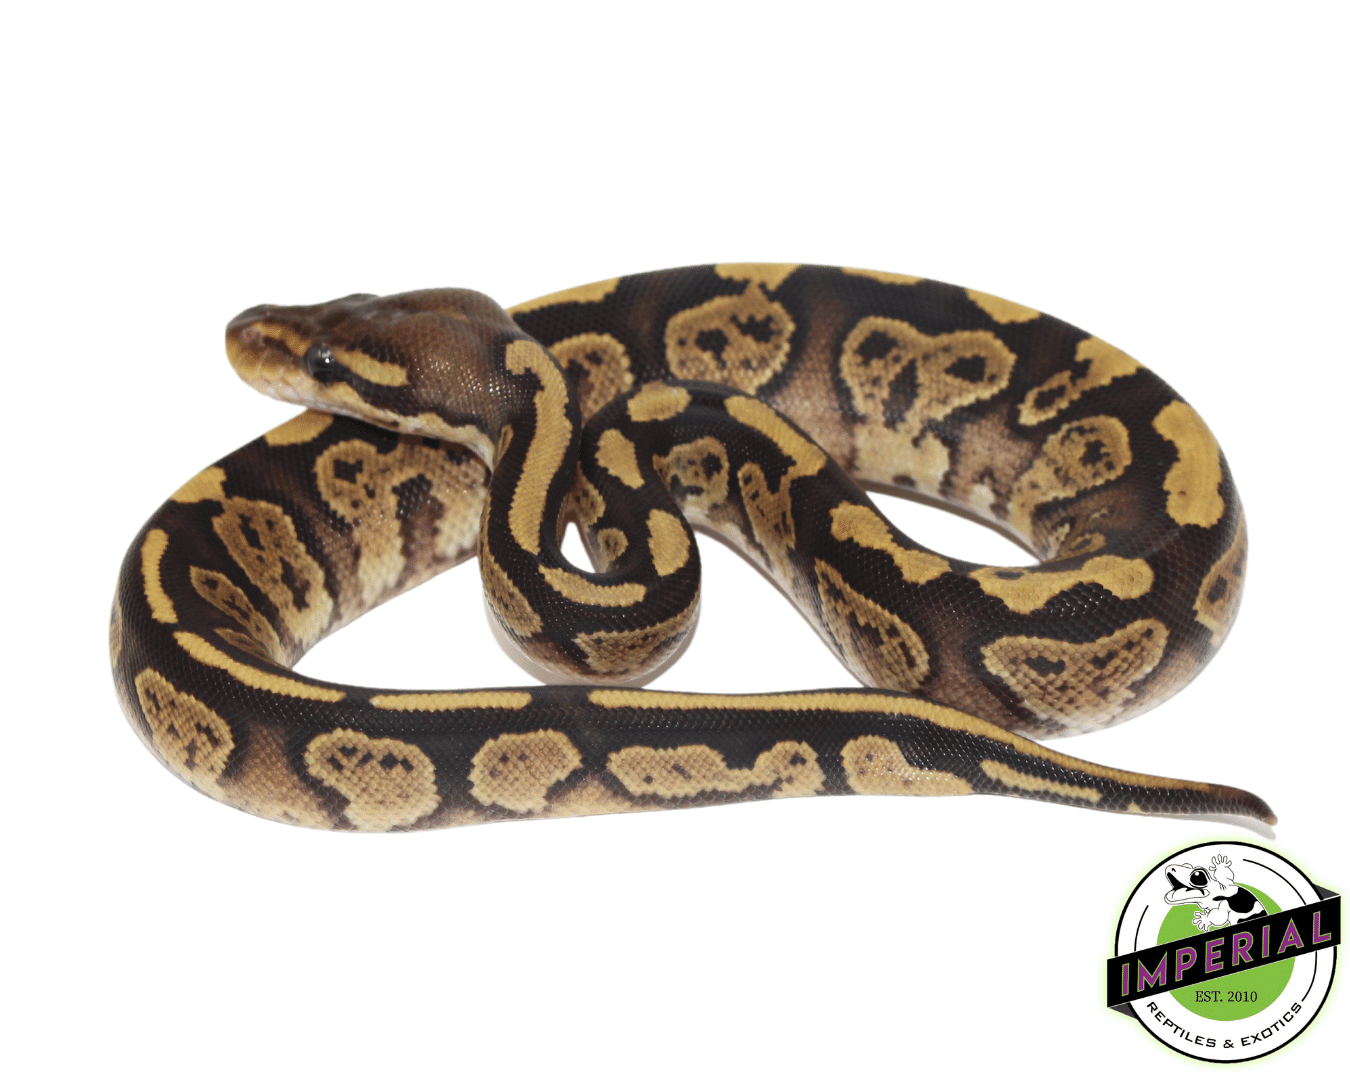 Blackhead Fire ball python for sale, buy reptiles online